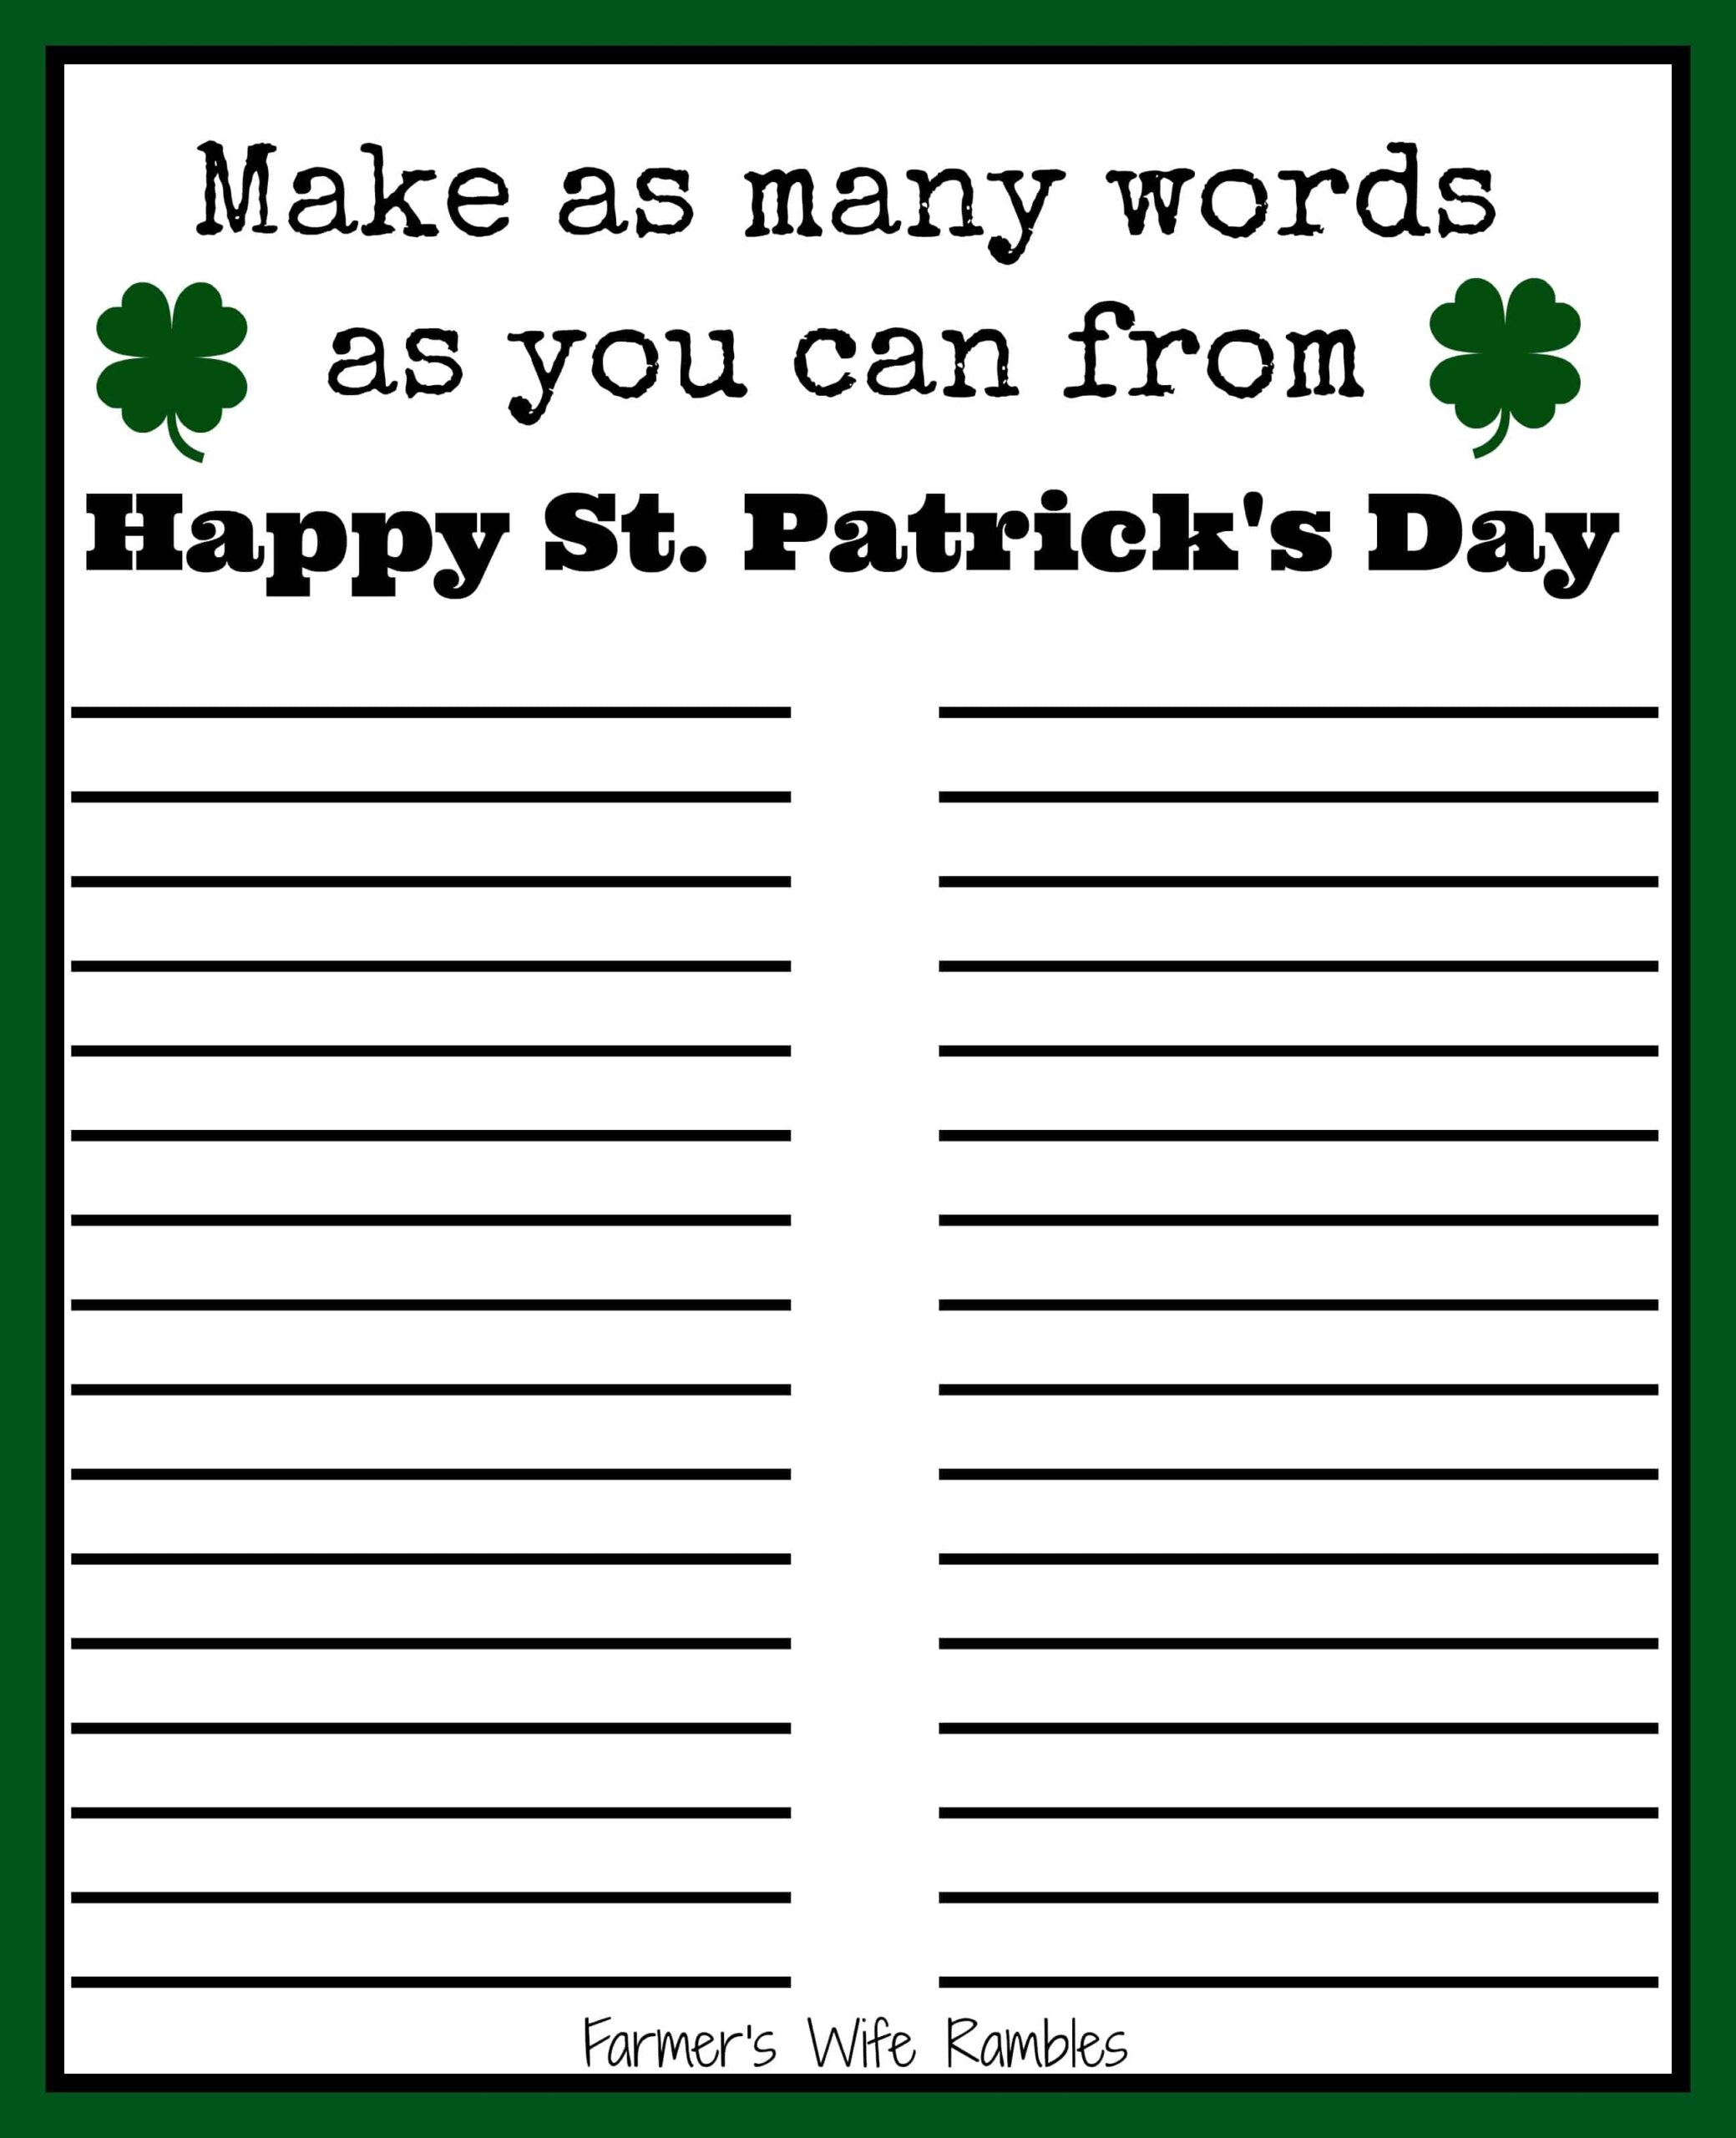 Free St Patrick s Day Word Puzzle Printable Farmer s Wife Rambles